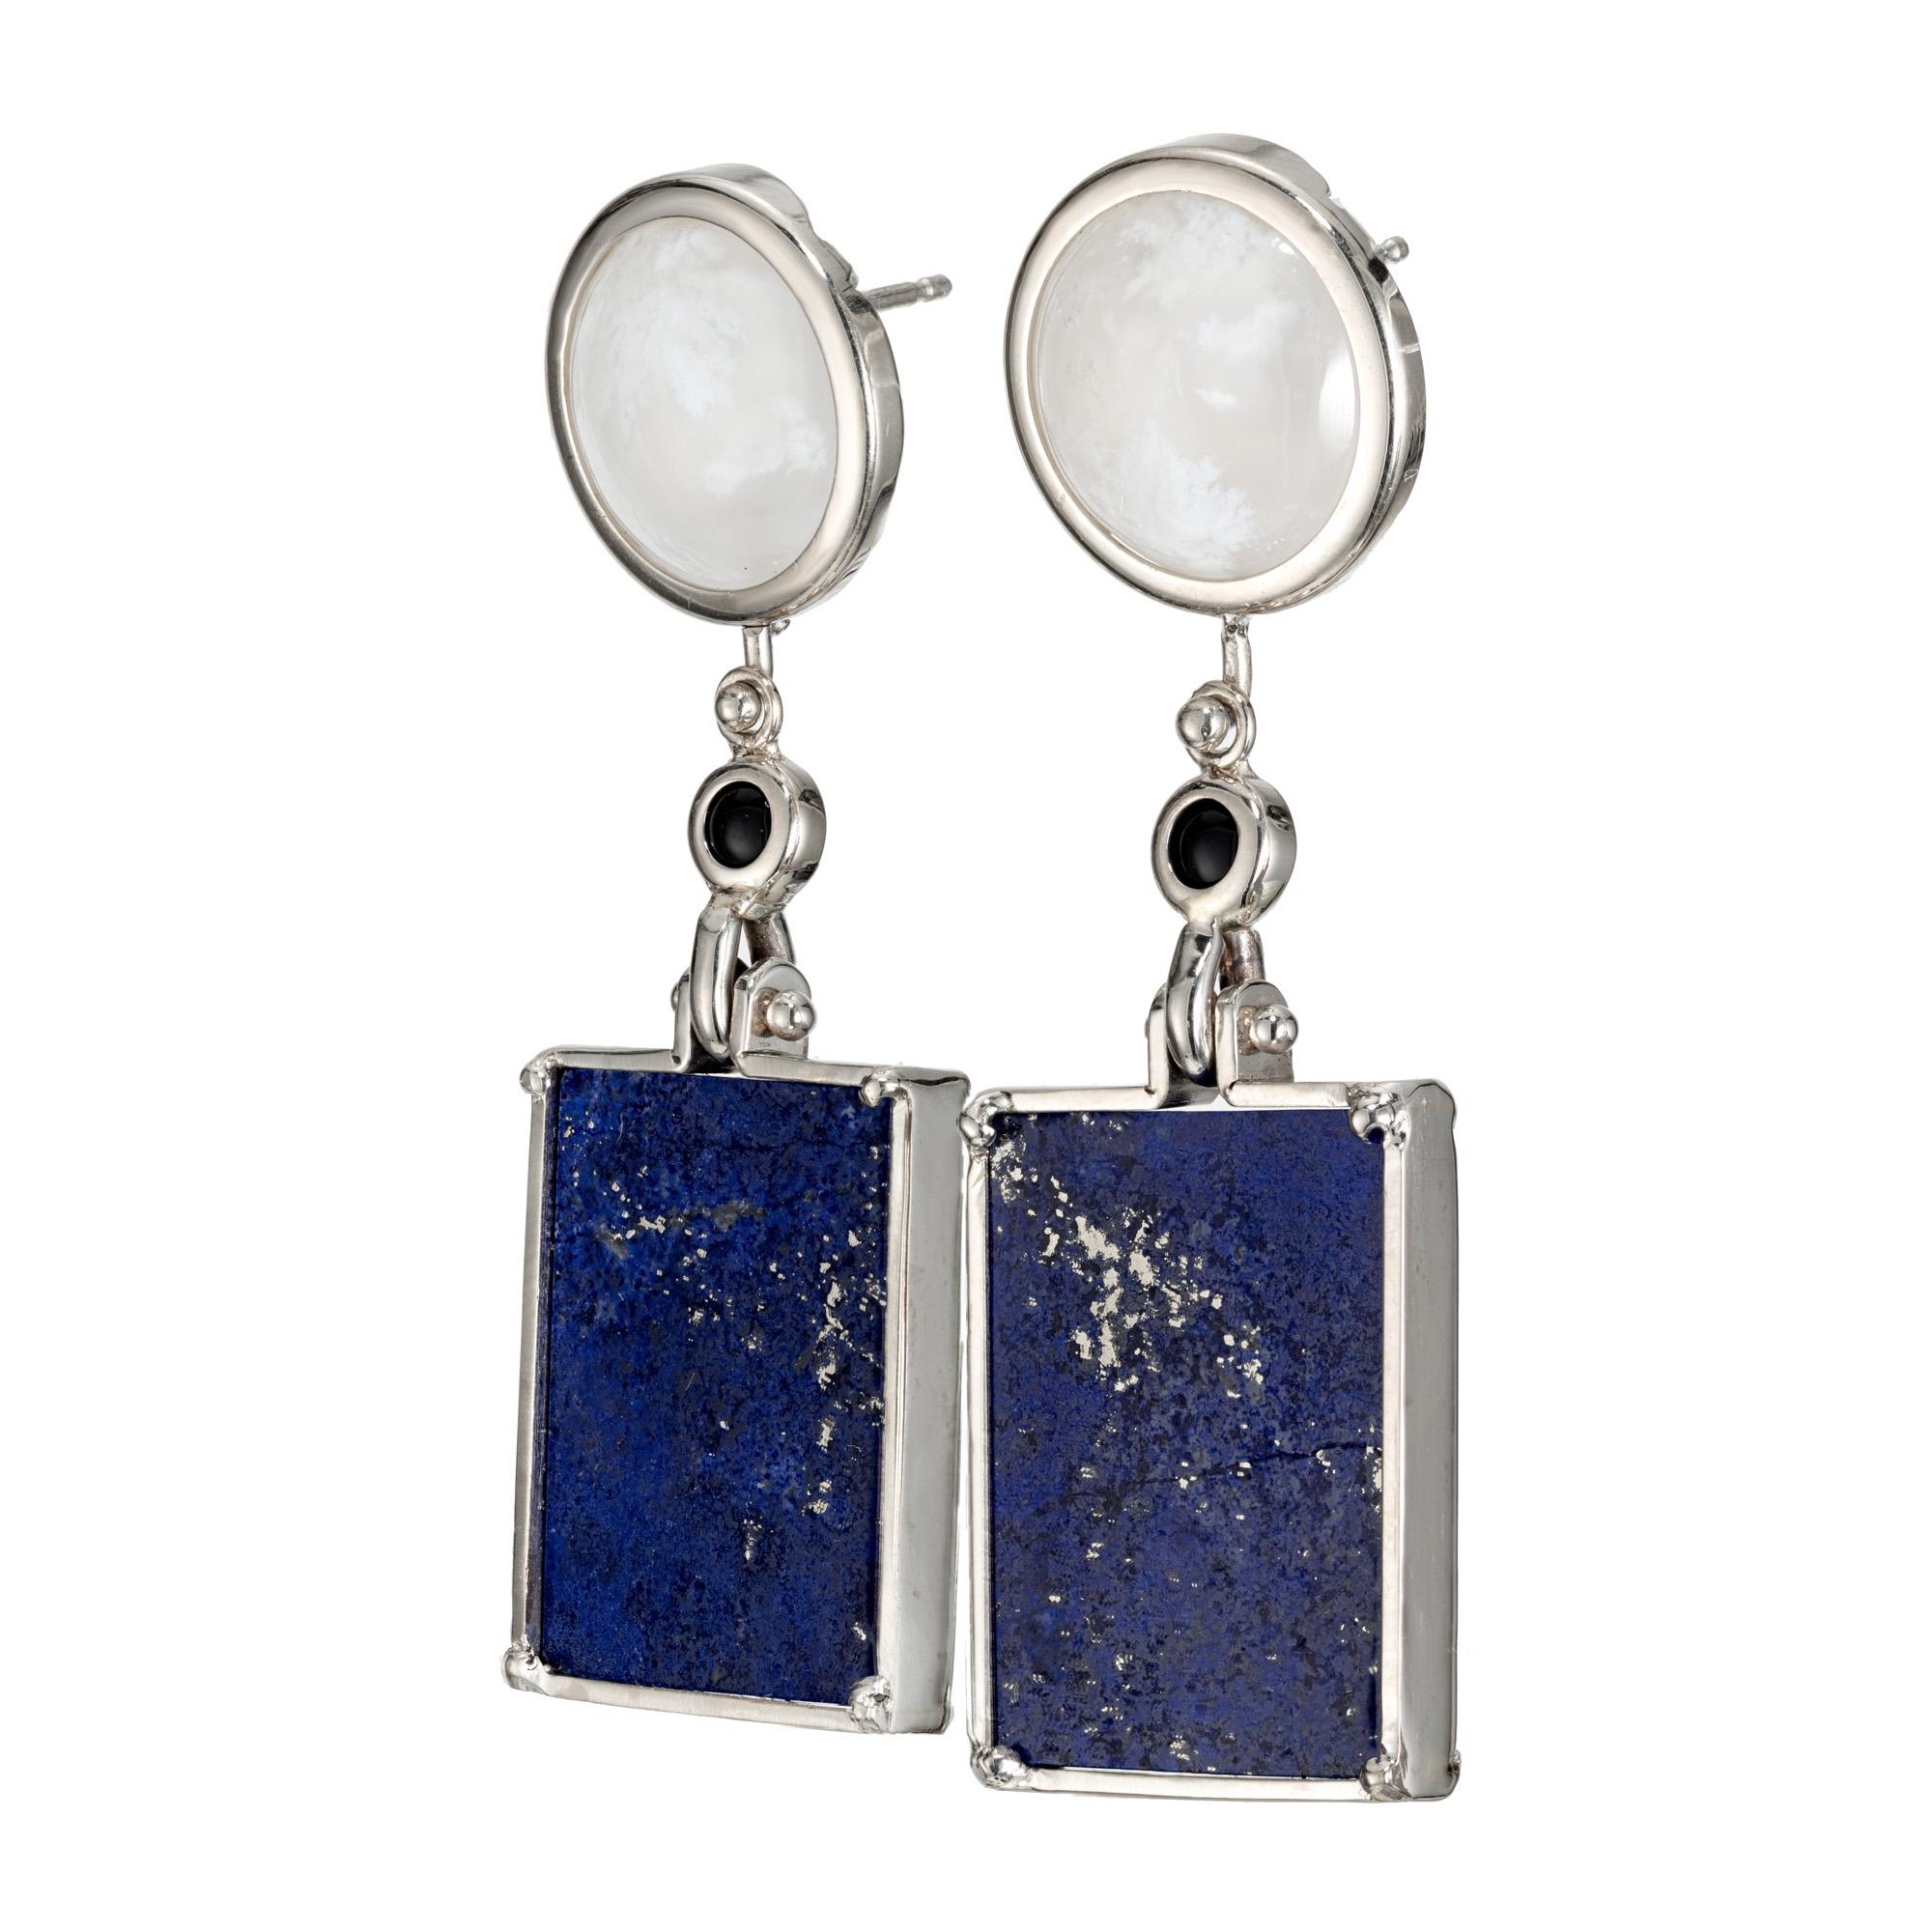 Agate, onyx and Lapis dangle earrings. 2 rectangle slices of lapis in 14k white gold frames with 2 round cabochon onyx and 2 round cabochon lace agate bezel set accent stones. Custom made pair of 14k white gold dangle earrings from the Peter Suchy